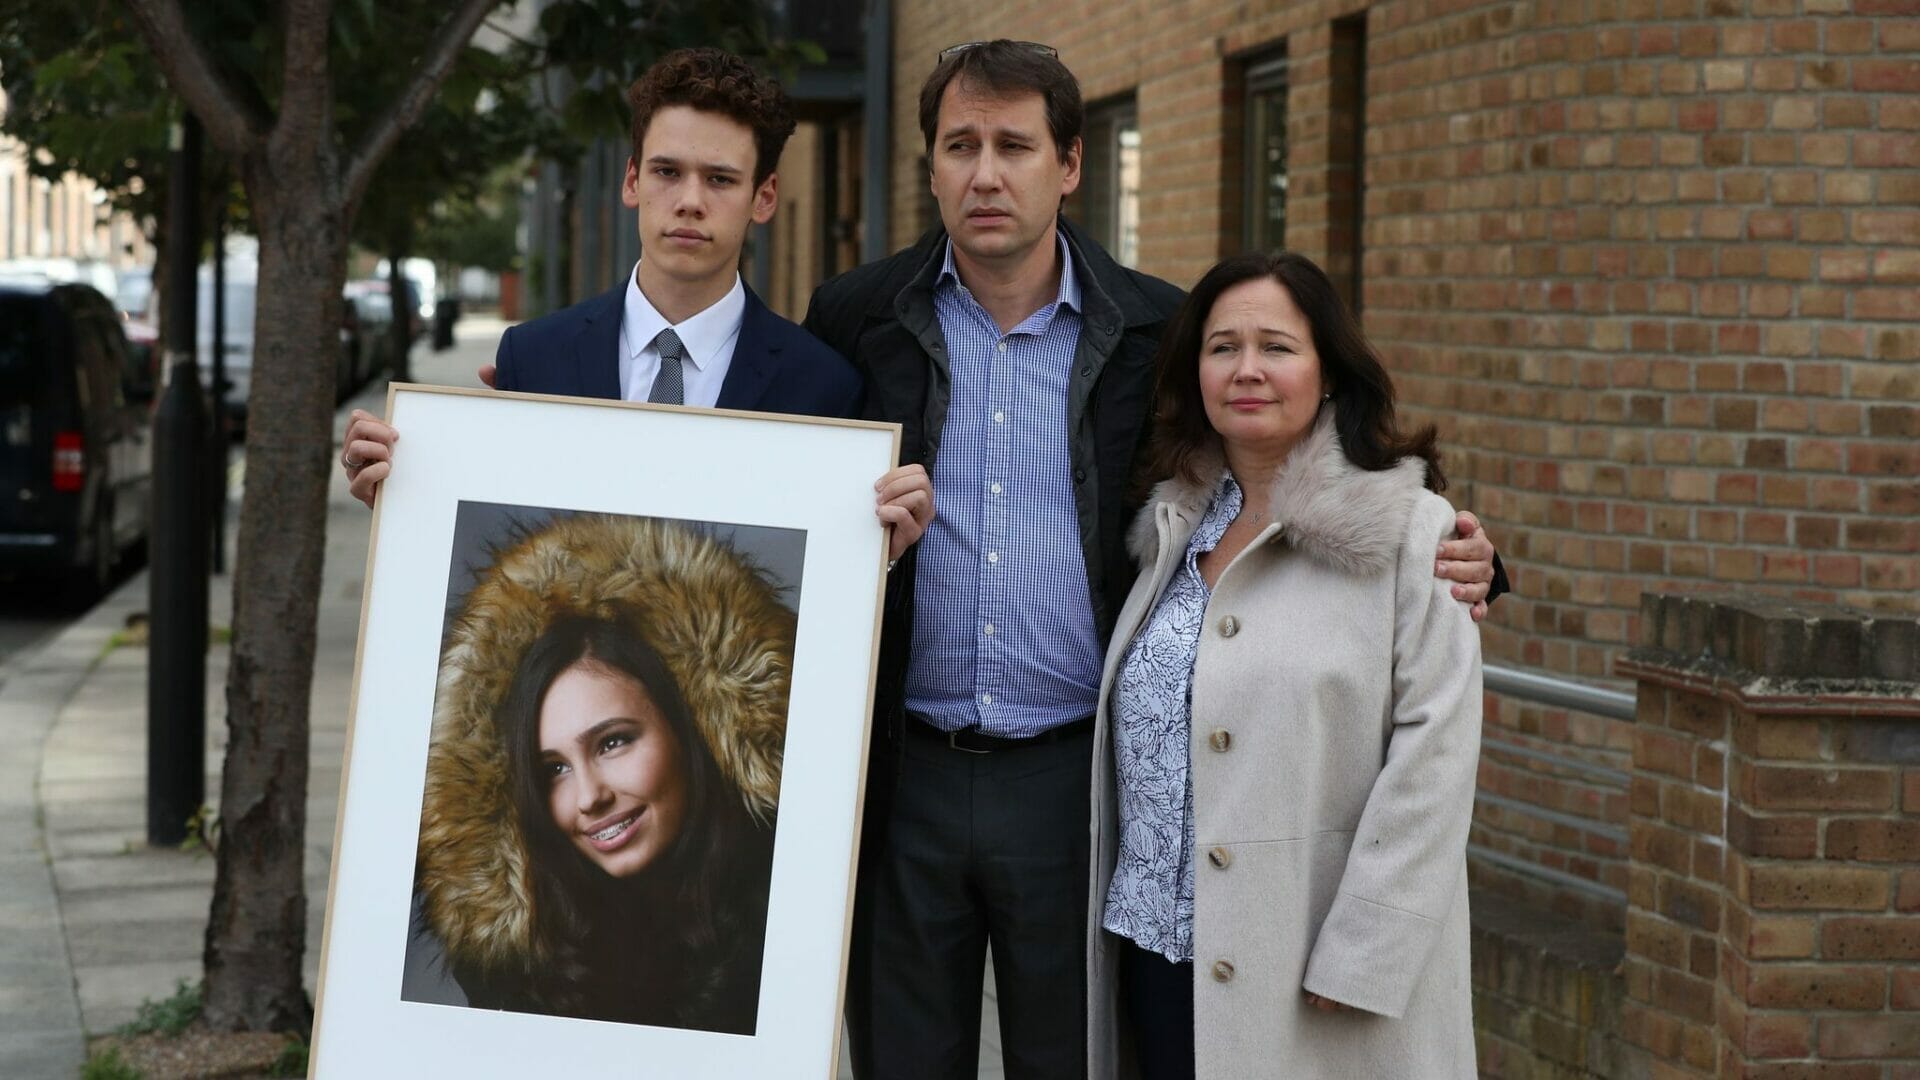 Caterers, it’s time to prepare for Natasha’s Law